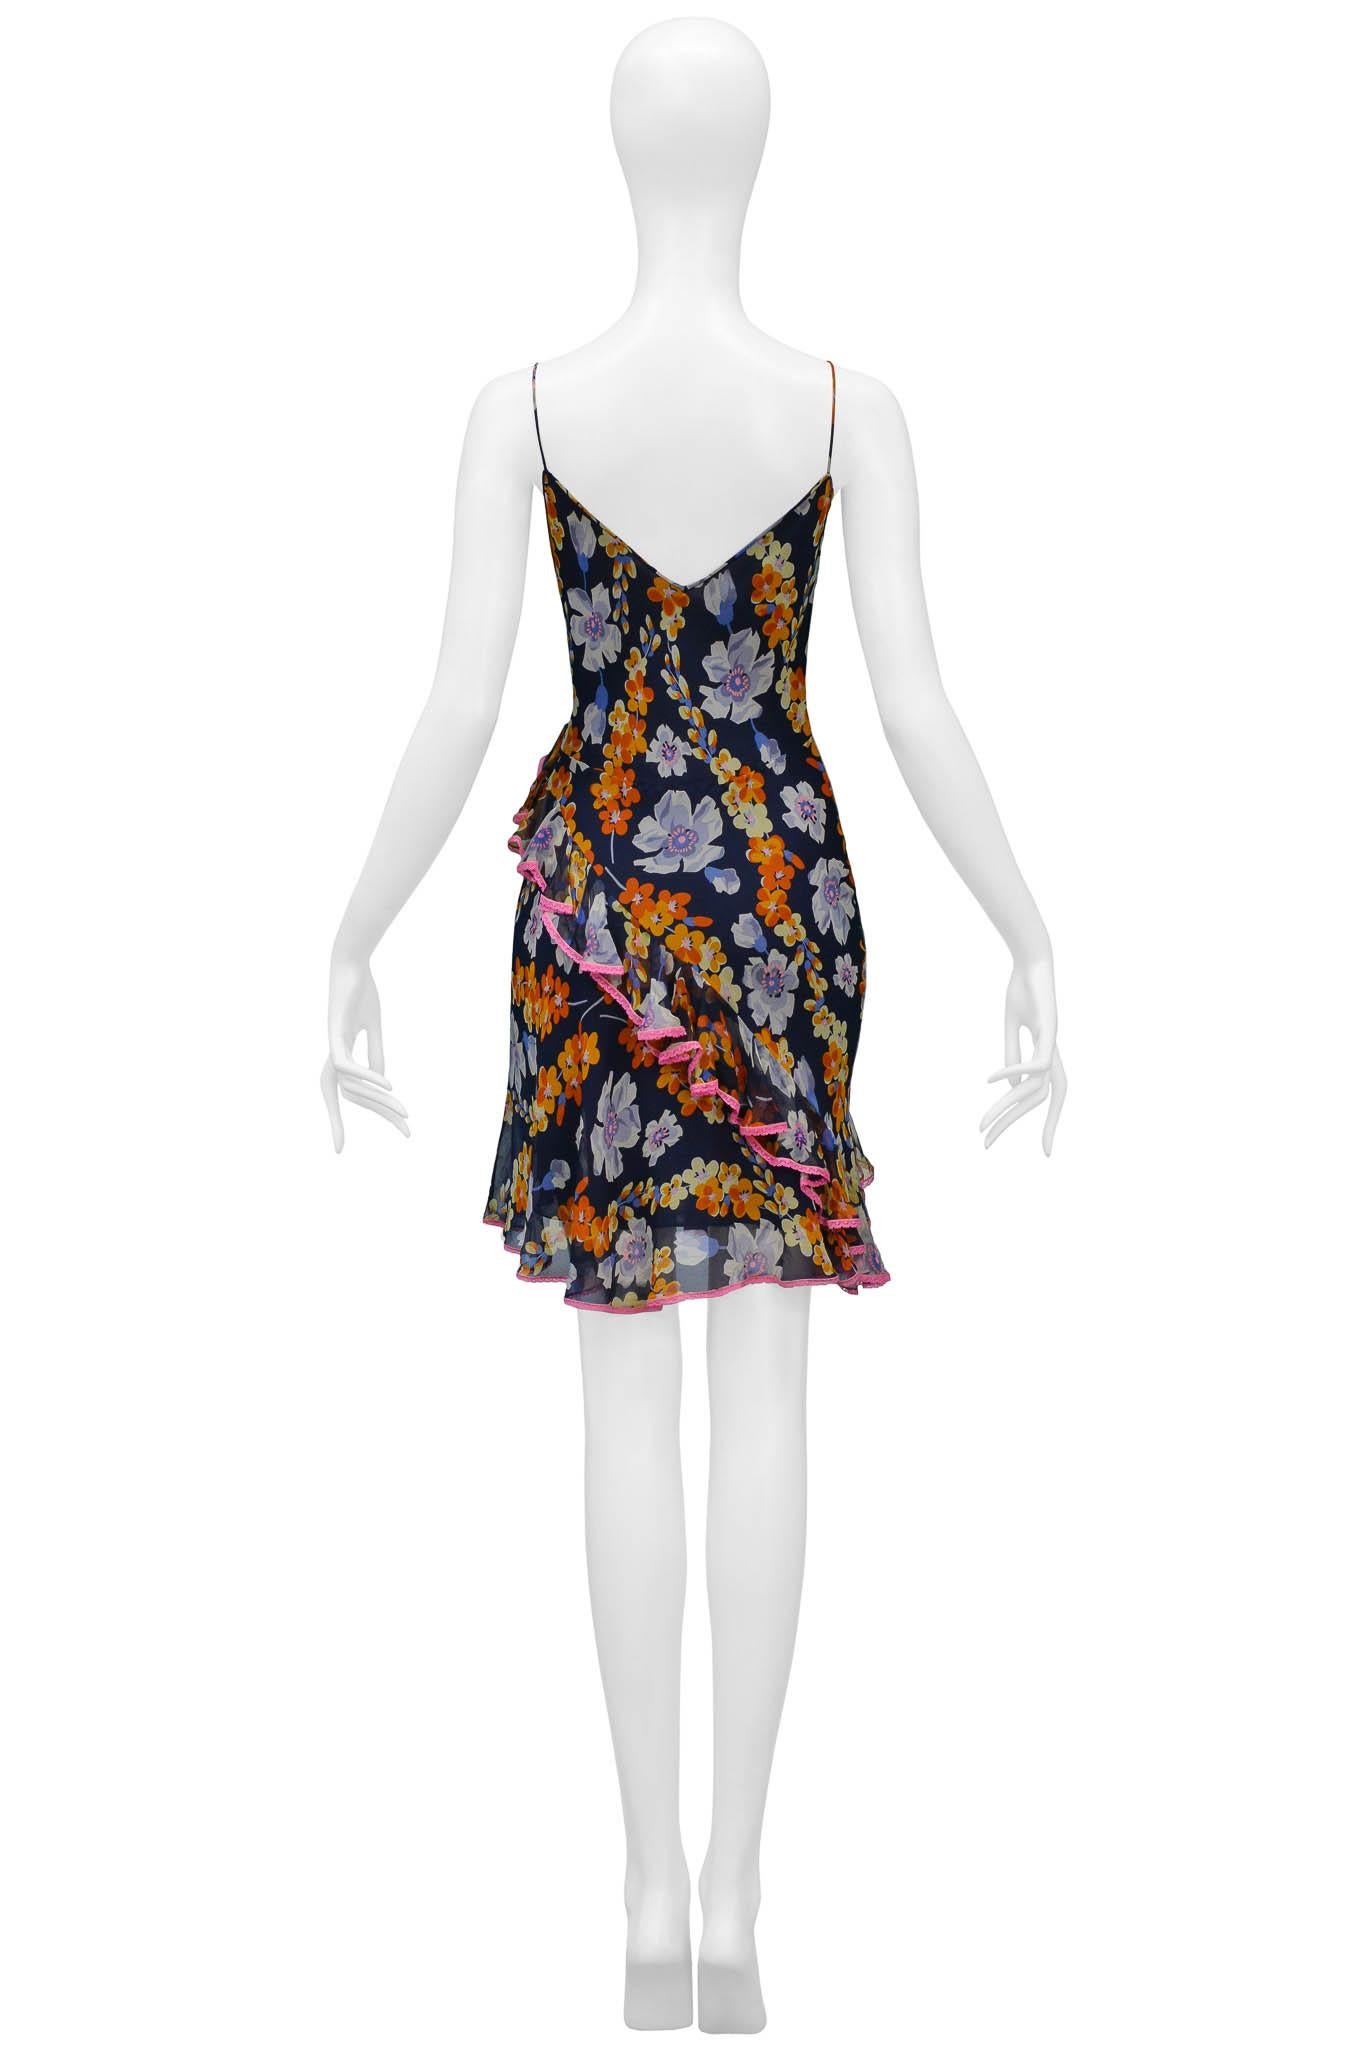 Brown John Galliano Navy Slip Dress With Floral Pattern & Pink Lace Trim For Sale